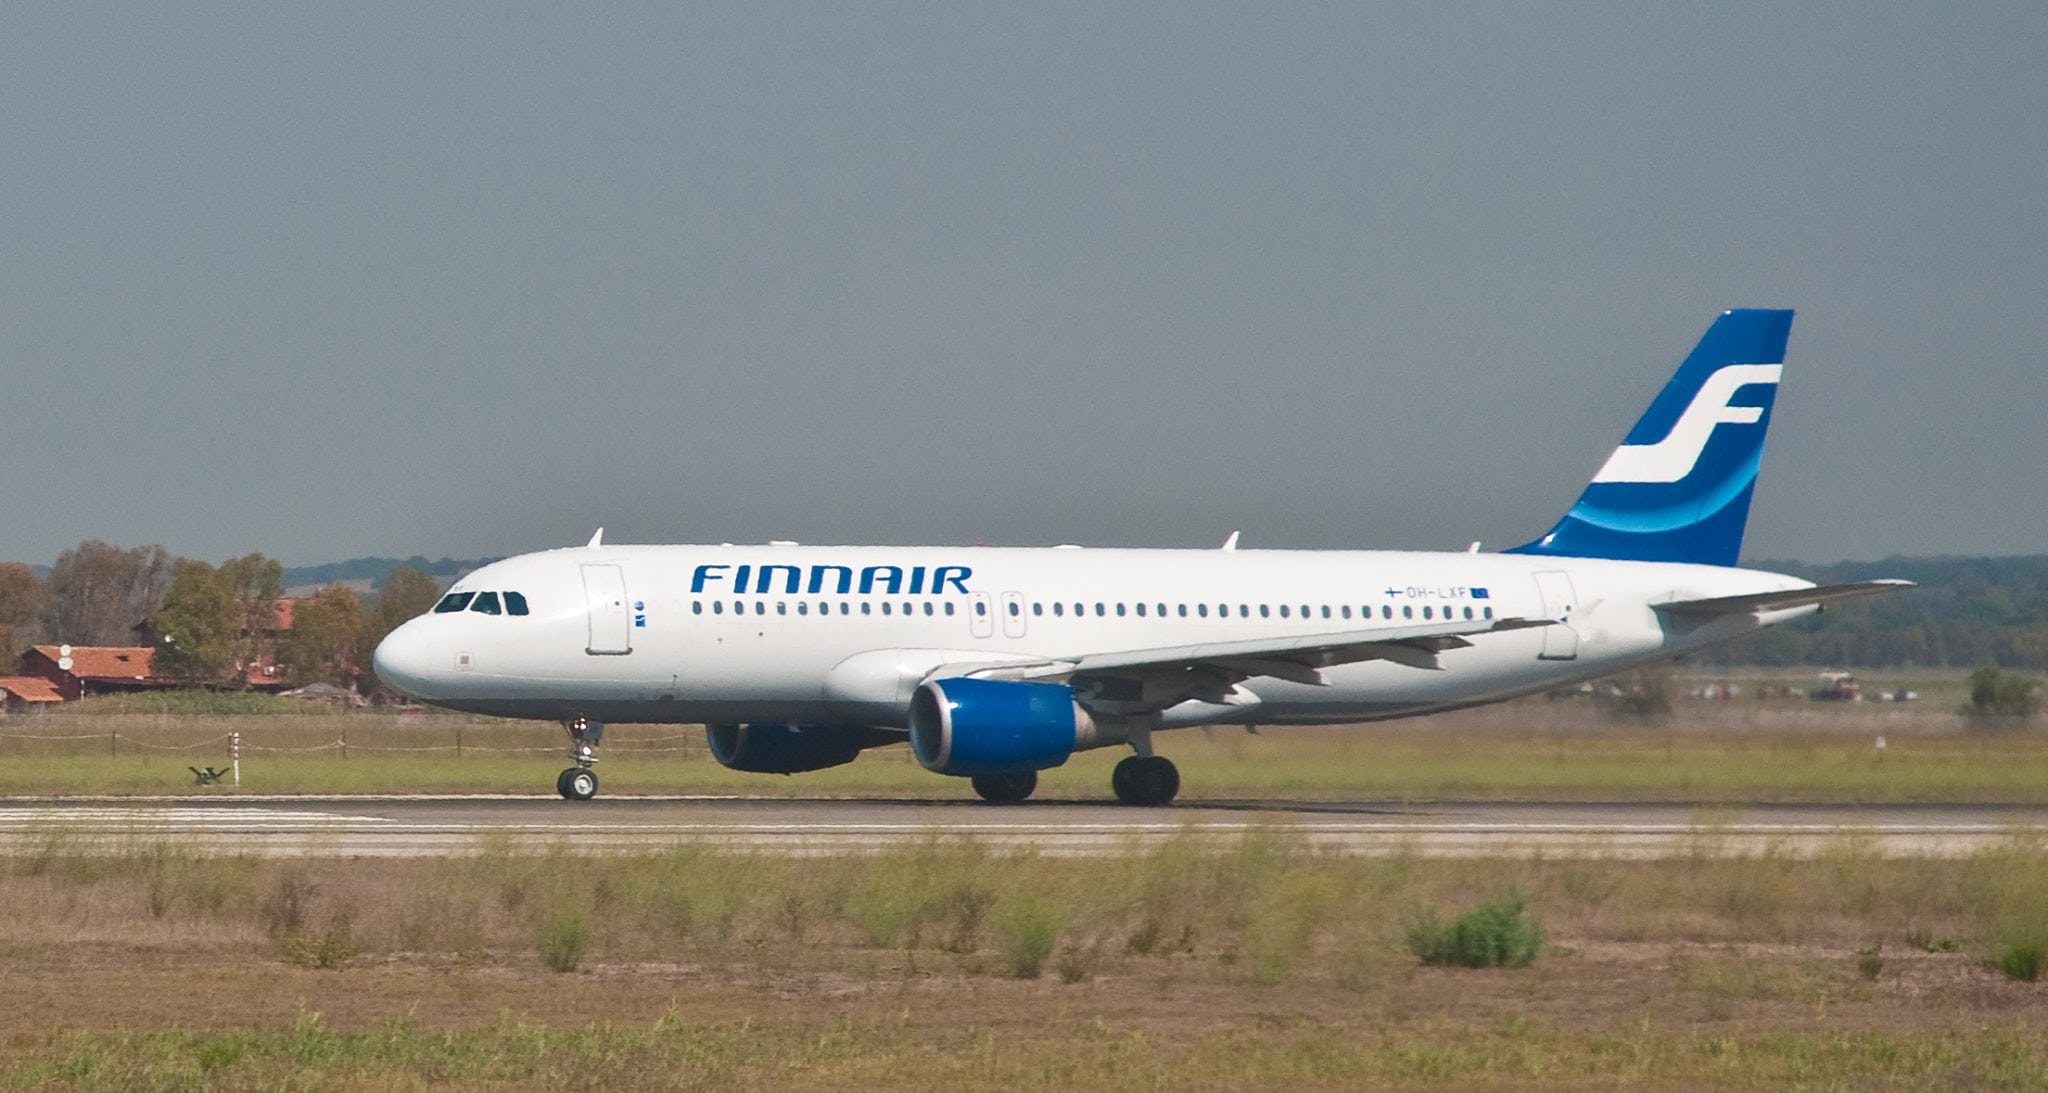 Airbus A320-200 OH-LXF of Finnair in Rome Fiumicino Airport, Italy